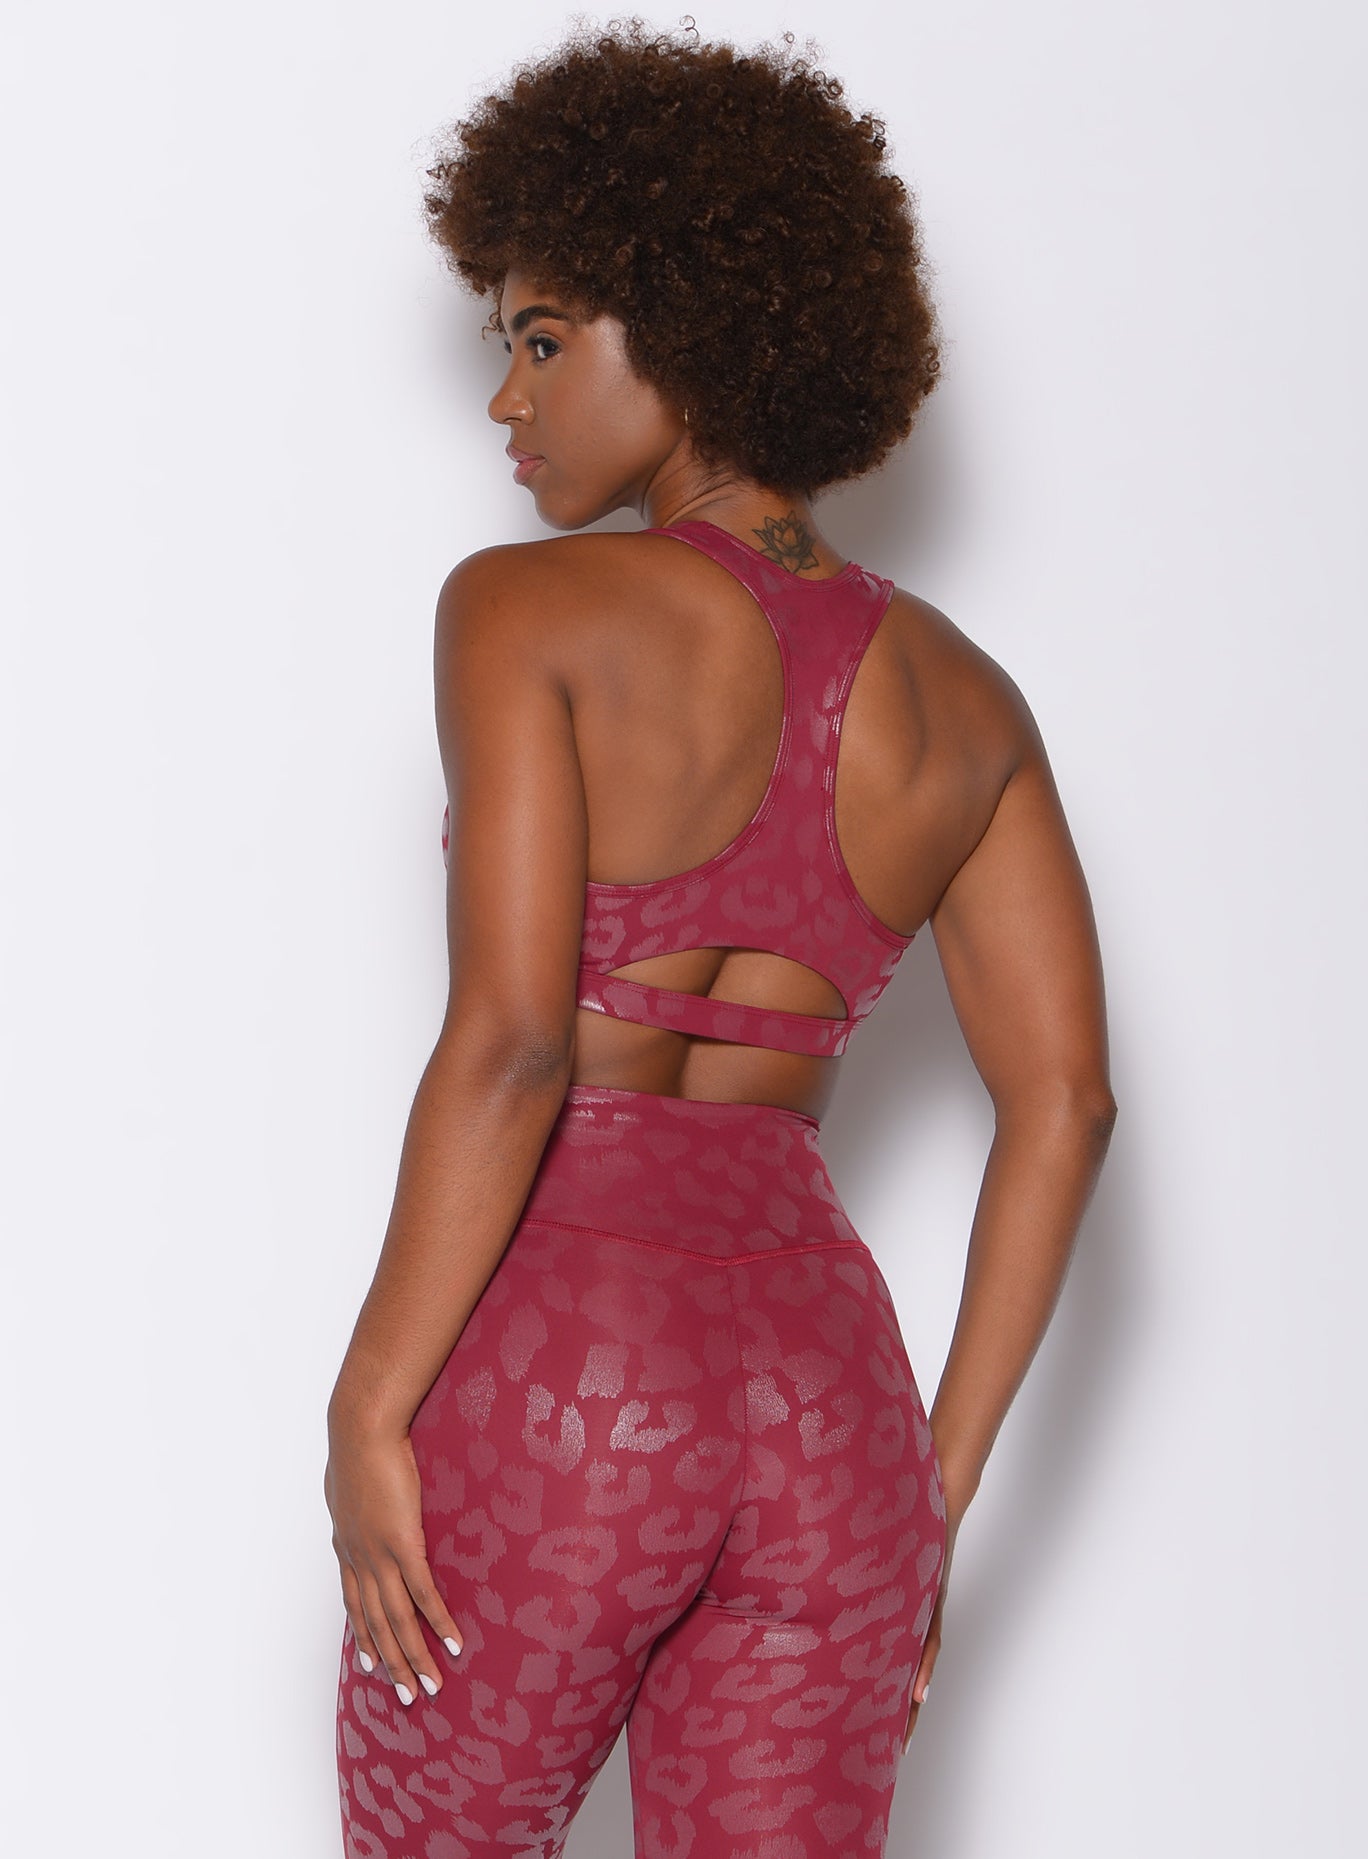 Back profile view of a model wearing our shine leopard bra in Raspberry Leopard color along with the matching leggings